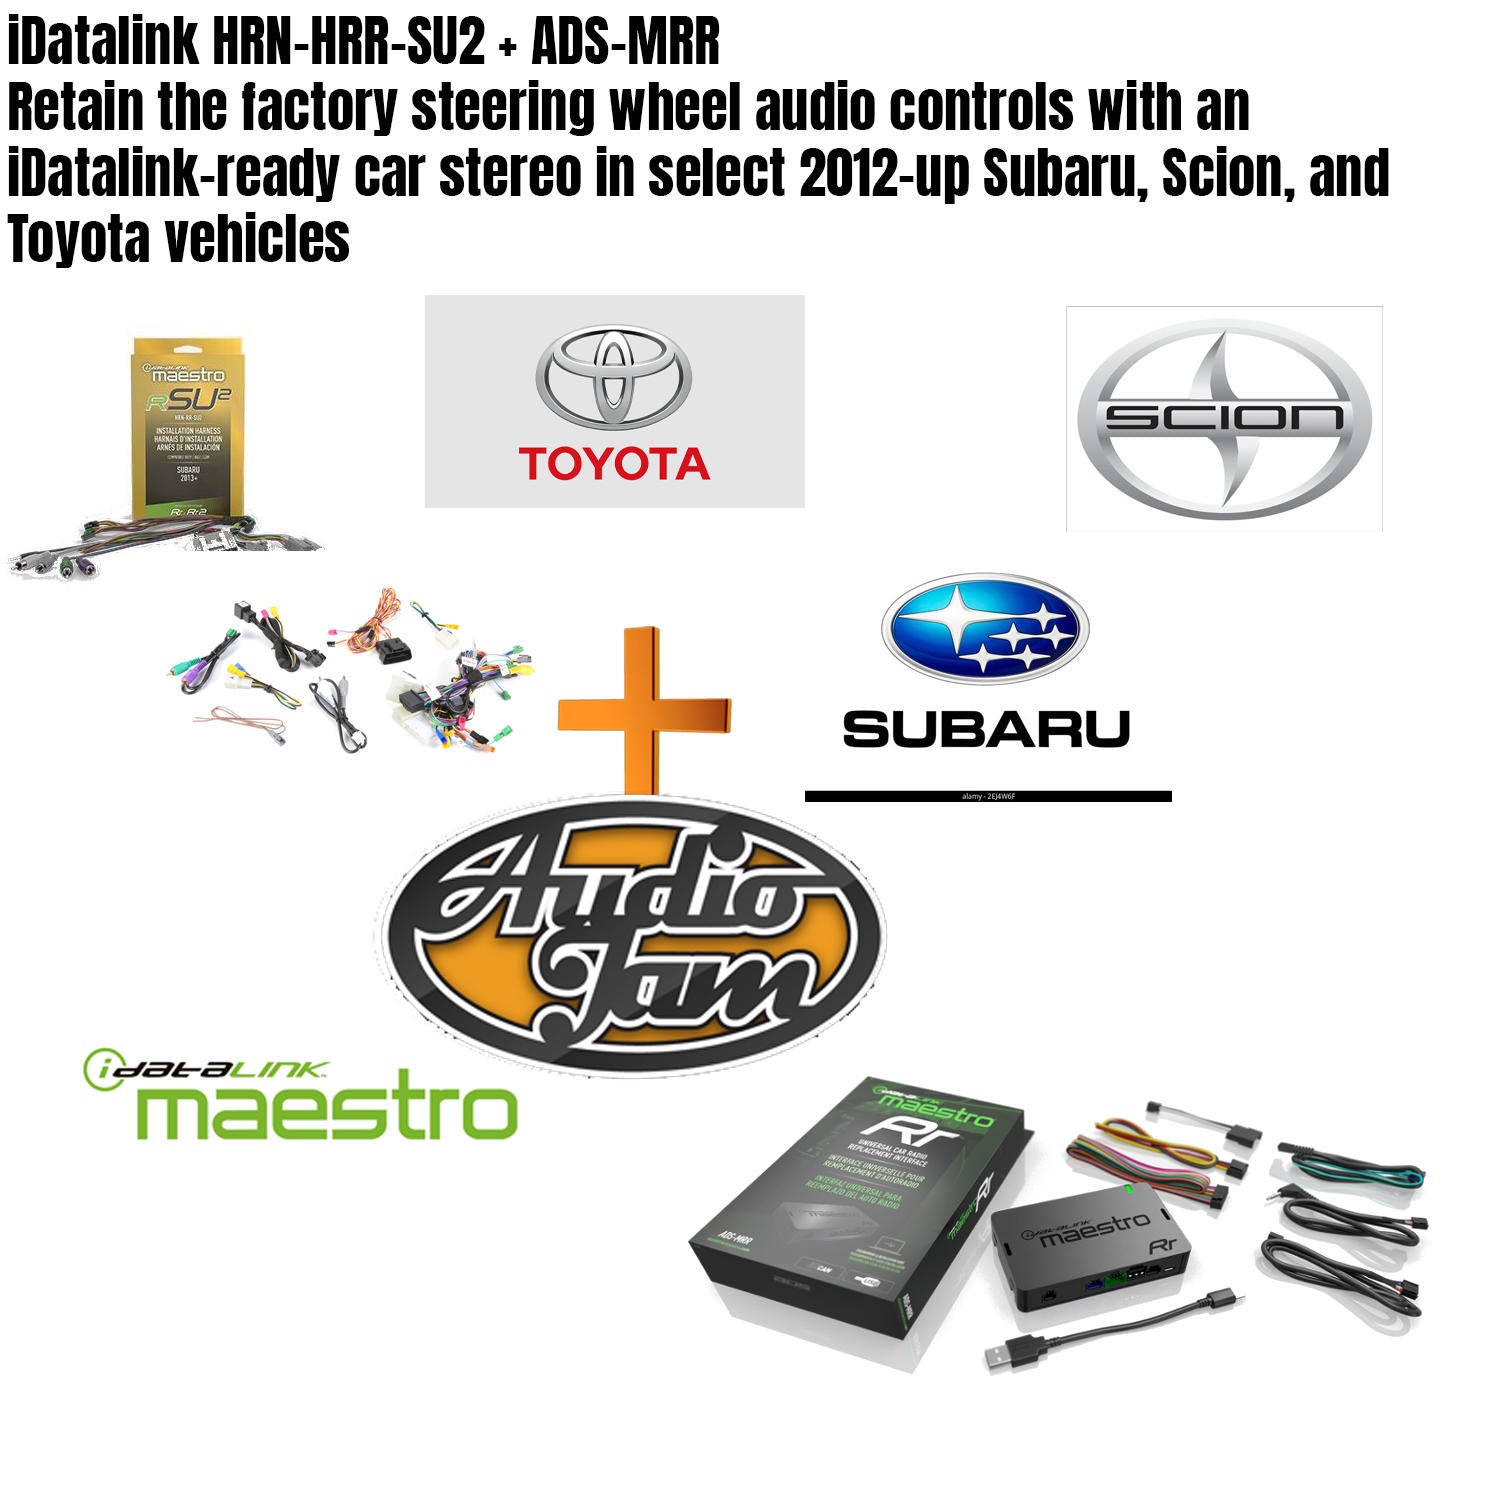 iDatalink HRN-HRR-SU2 + ADS-MRR Retain the factory steering wheel audio controls with an iDatalink-ready car stereo in select 2012-up Subaru, Scion, and Toyota vehicles